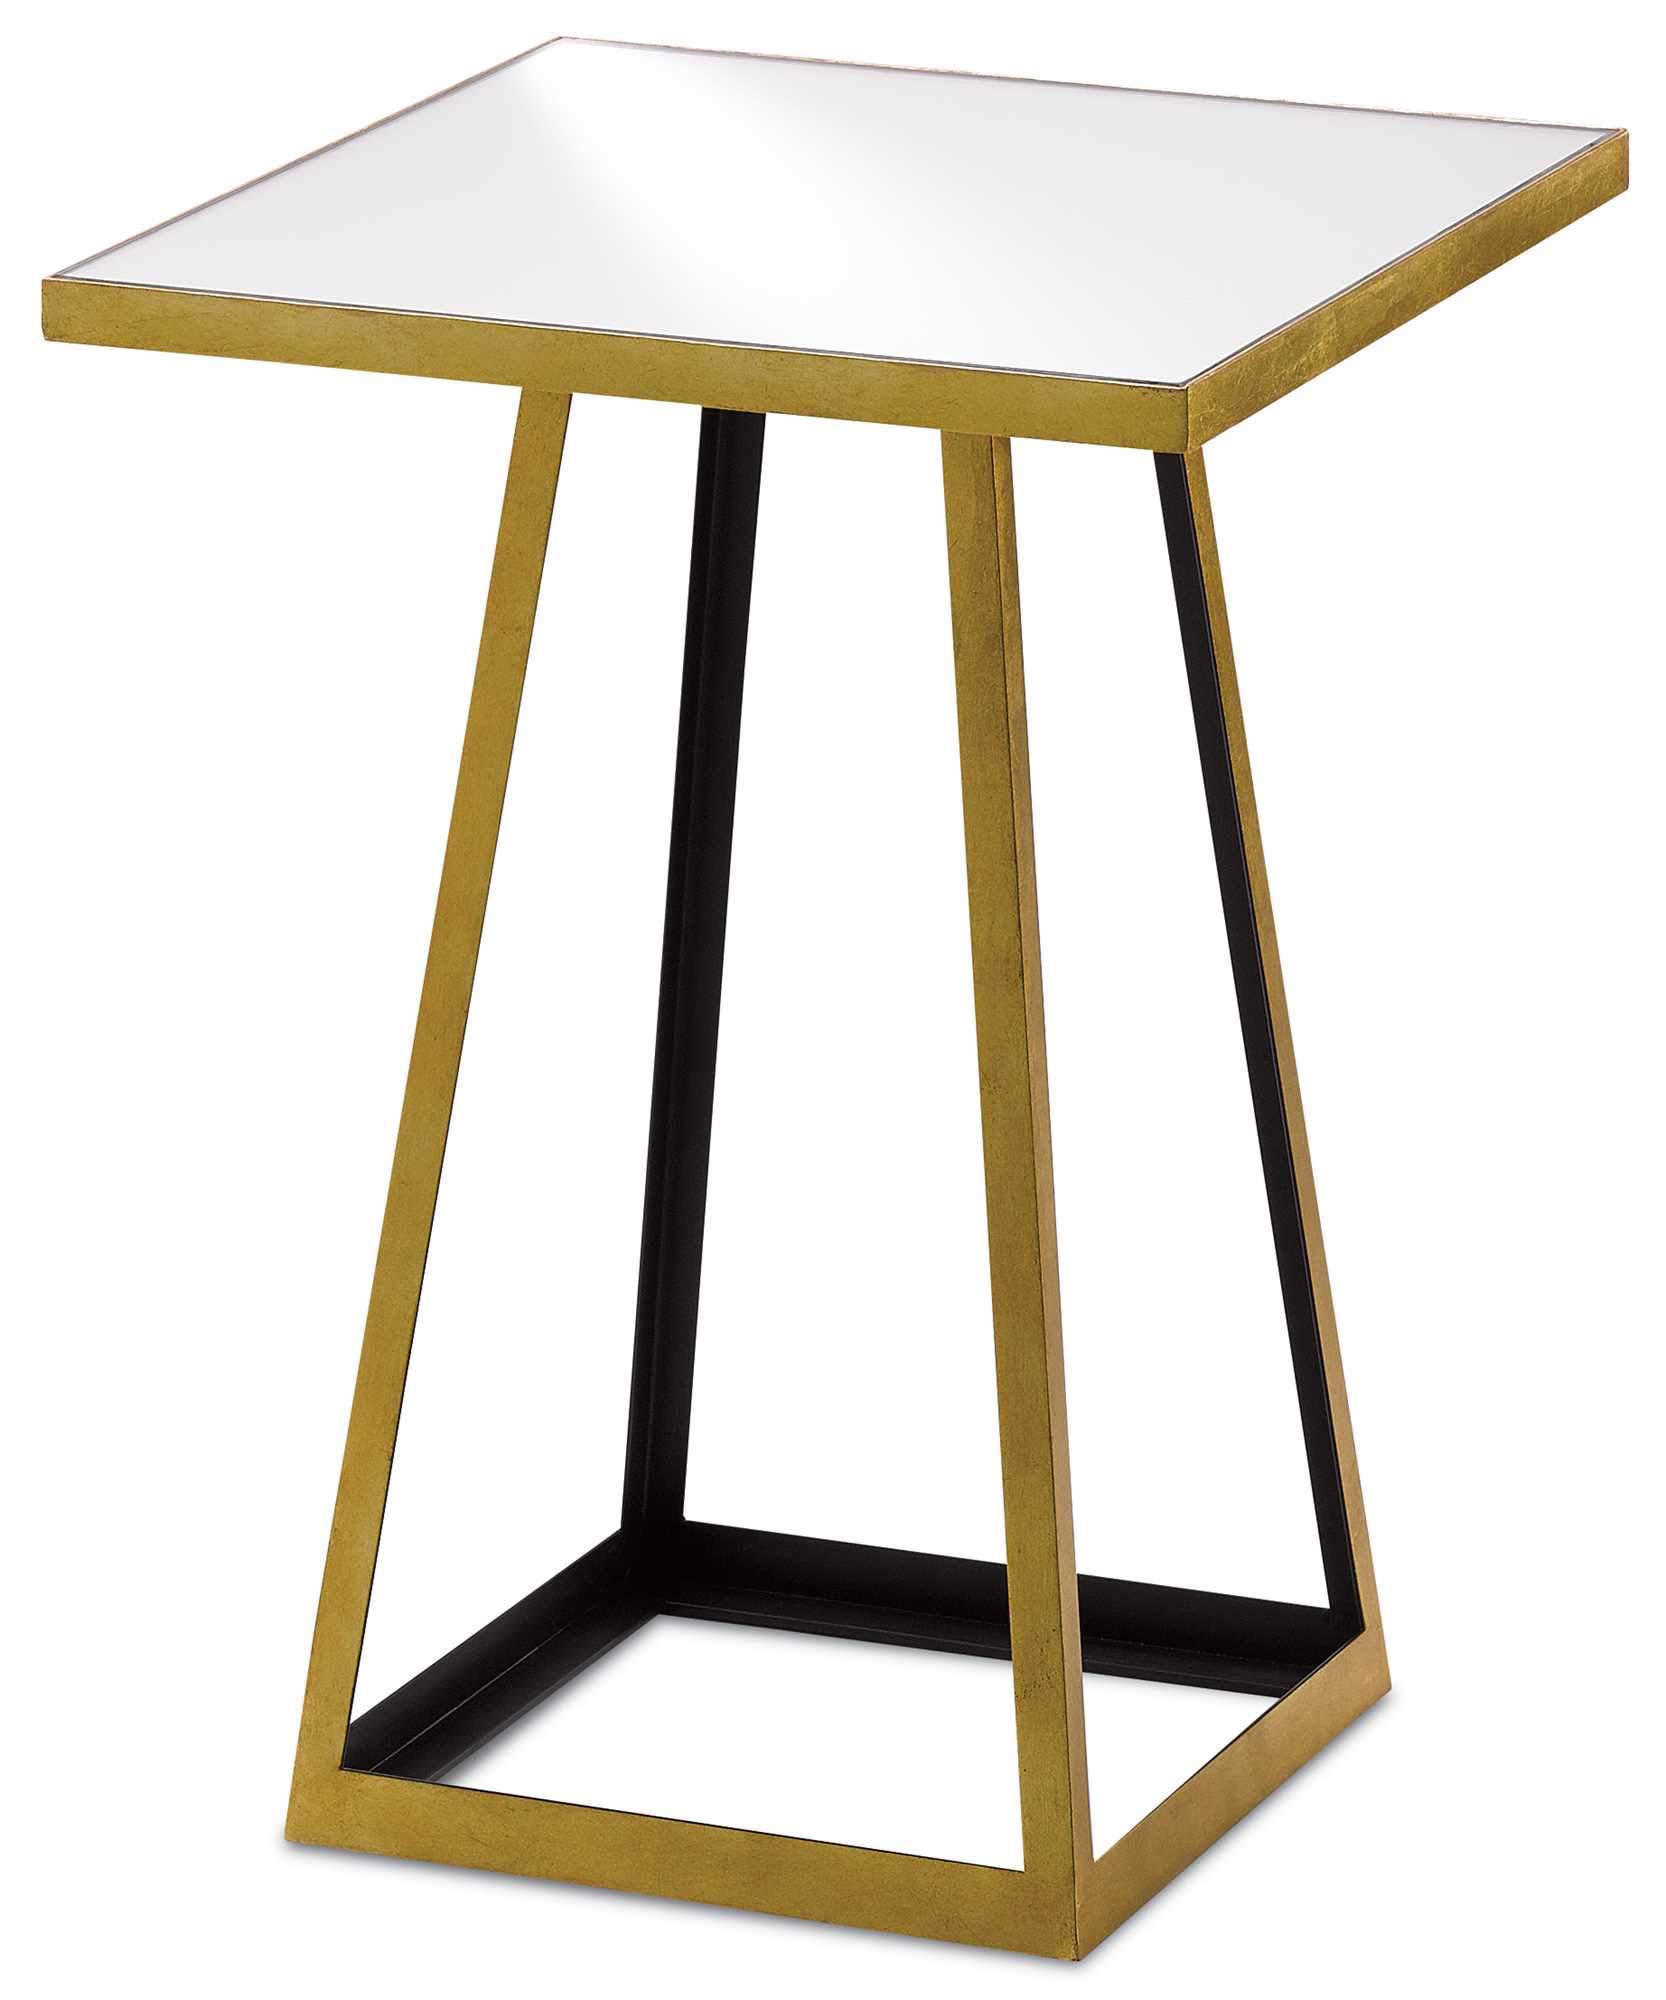 currey and company mondo accent table products definition striking black gold once meant oil bubbling from the ground but have new term with wooden market umbrella stable target